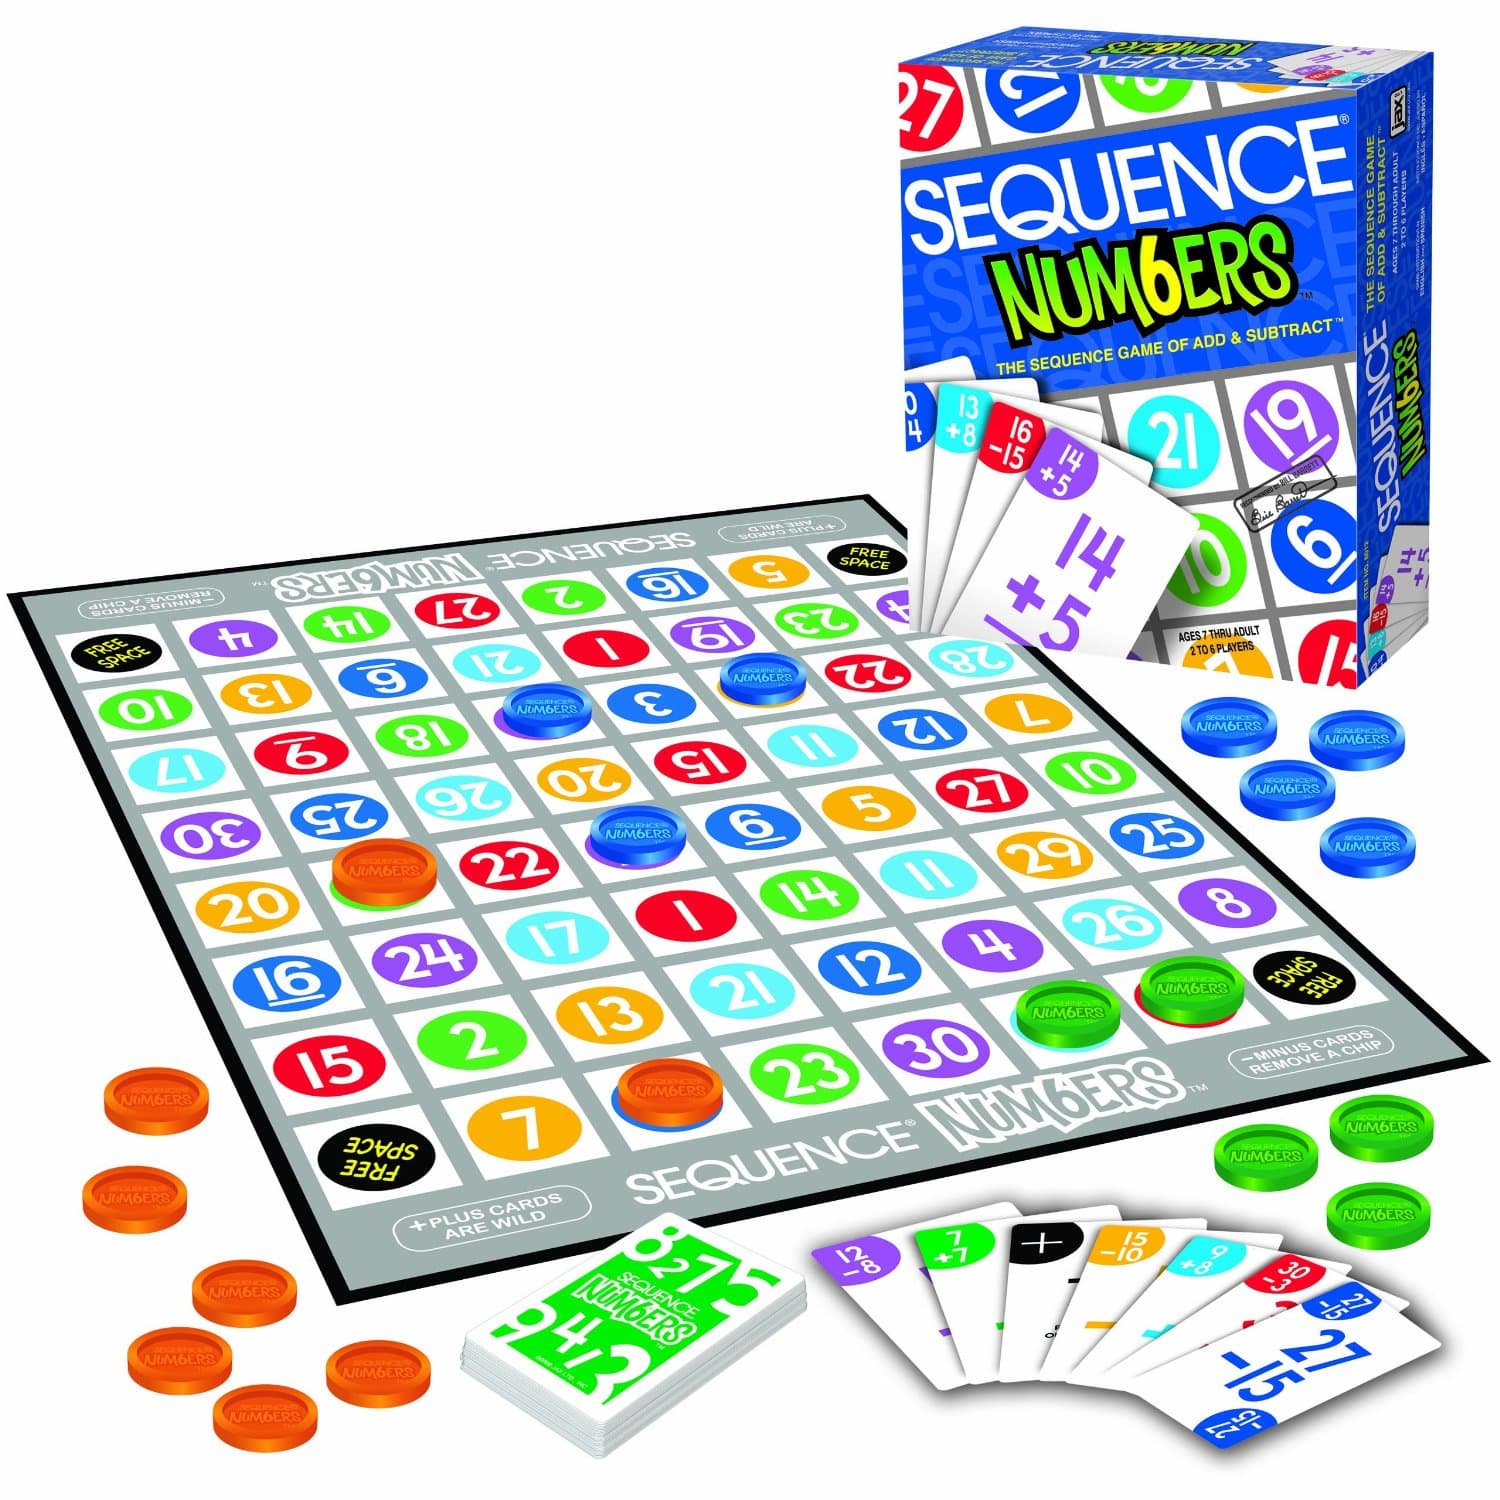 DEAL ALERT: Sequence Numbers – 27% off